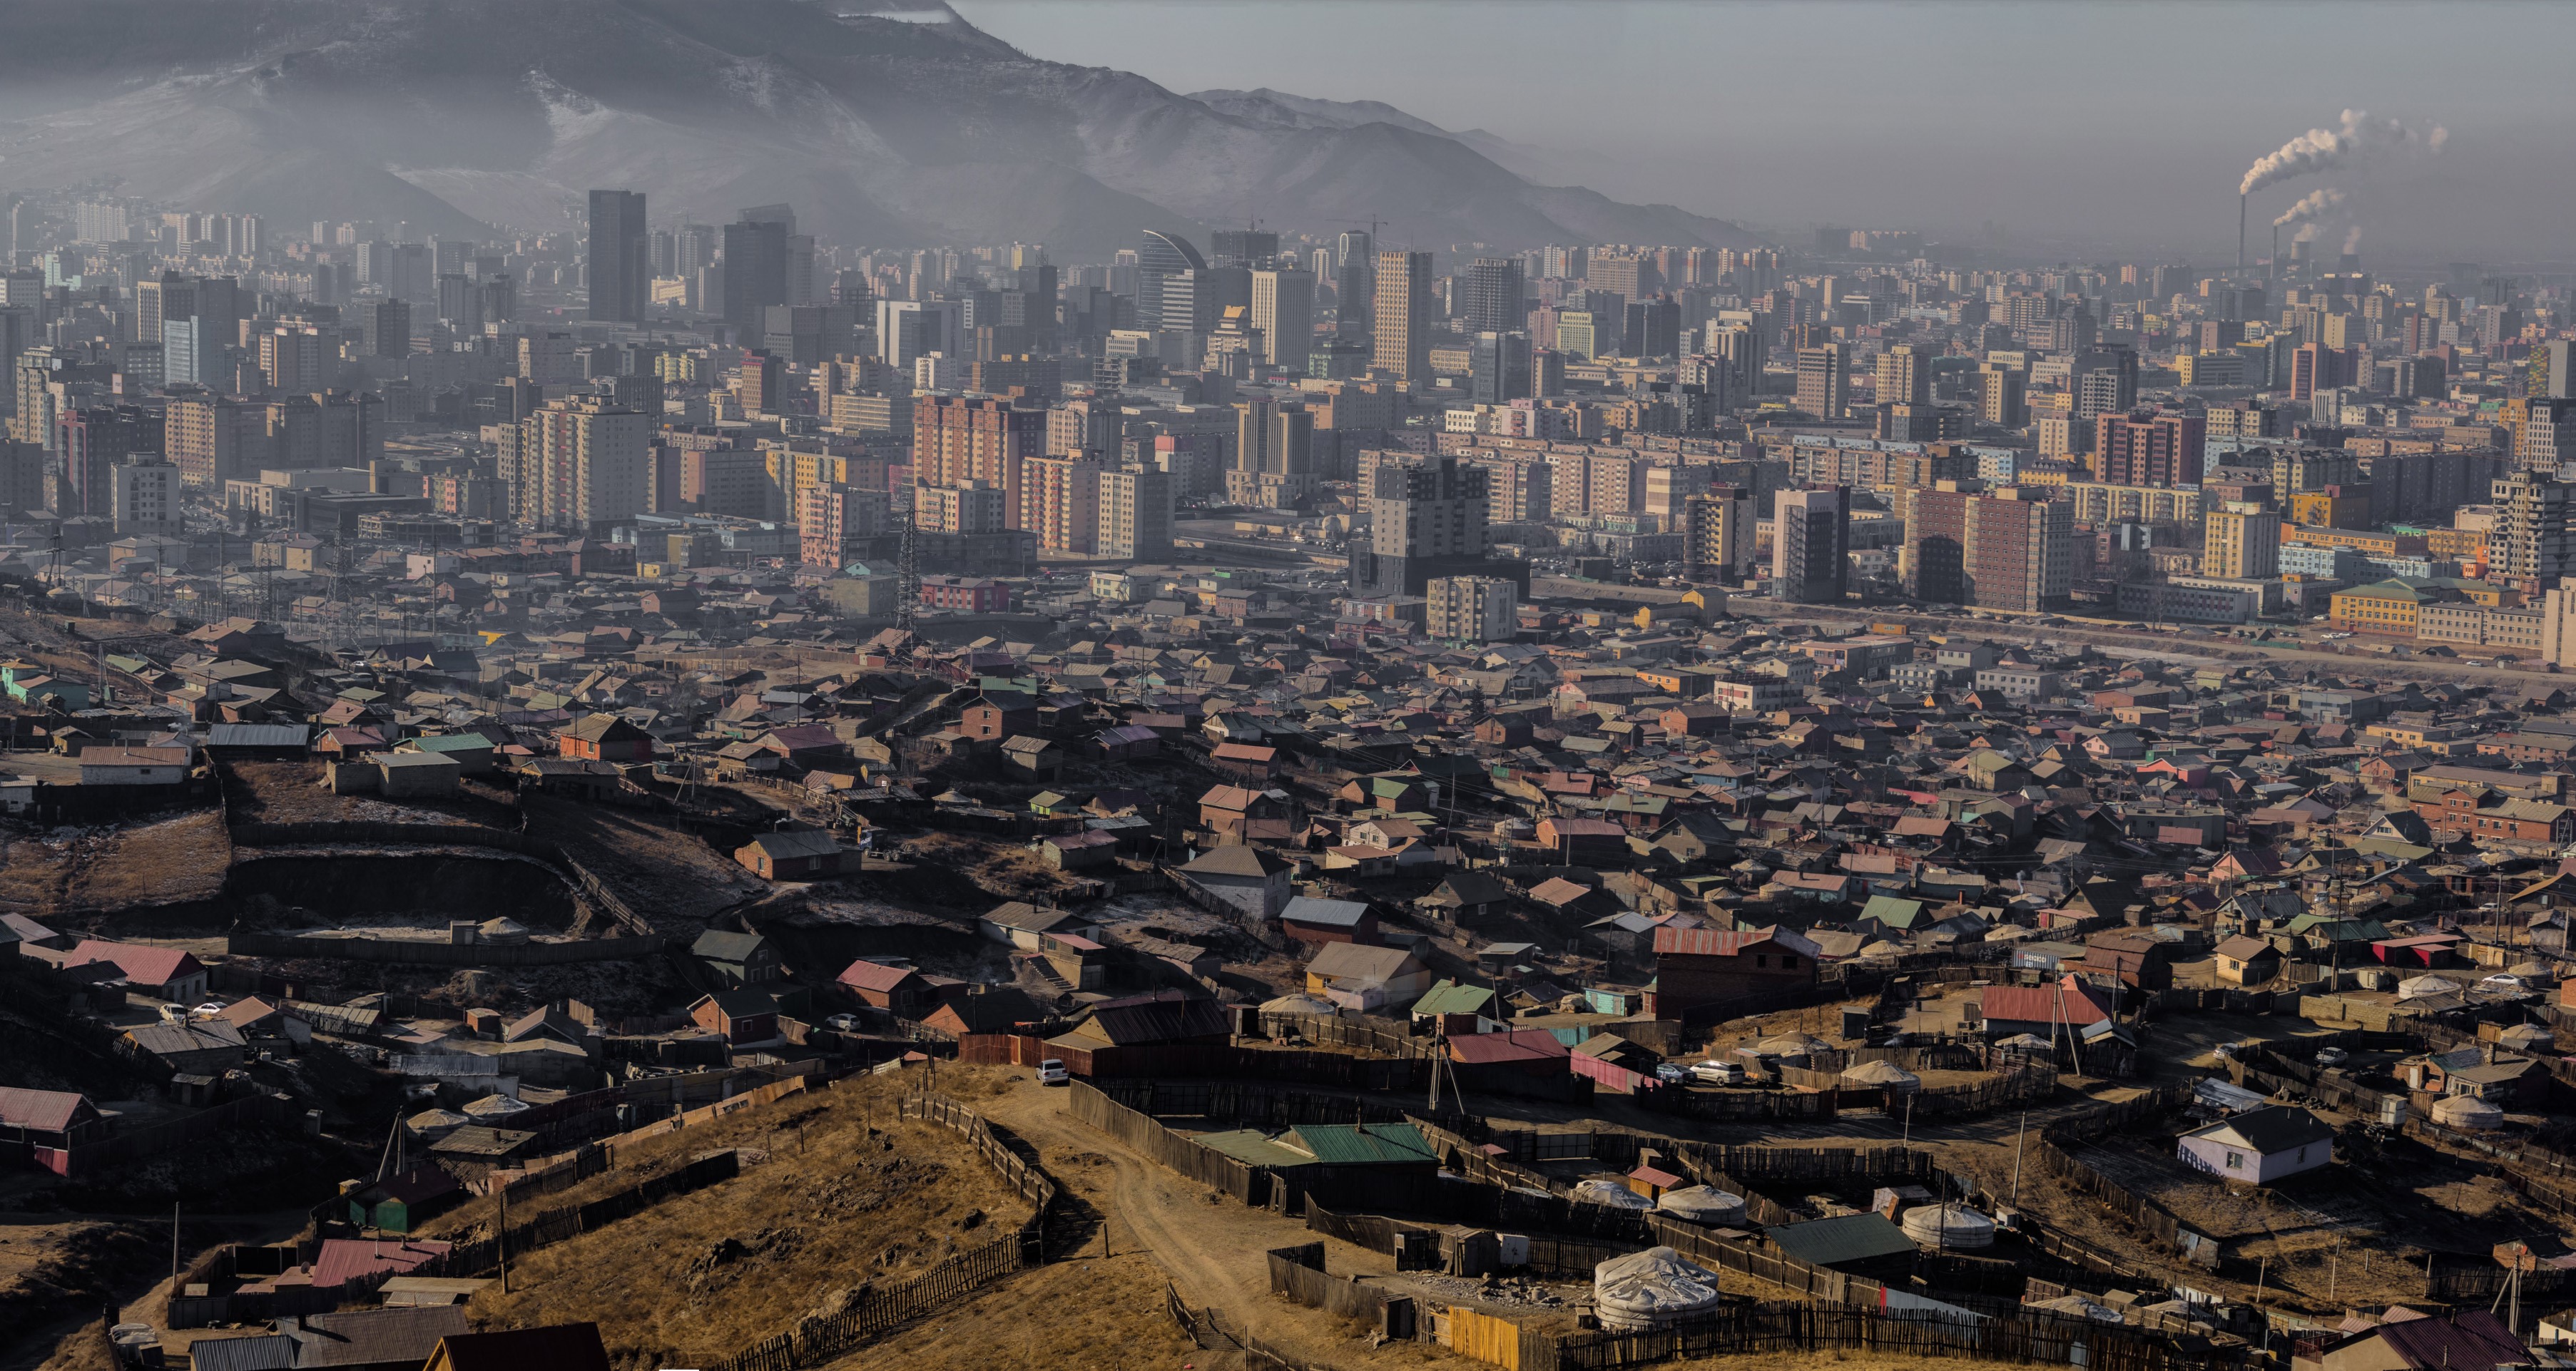 A panoramic view of Ulaanbaatar from a northeastern “ger district,” one of the unplanned communities built during the liberalization and globalization of Mongolia. A quarter of the entire country lives in Ulaanbaatar ger districts, though many dream of moving elsewhere, especially abroad.